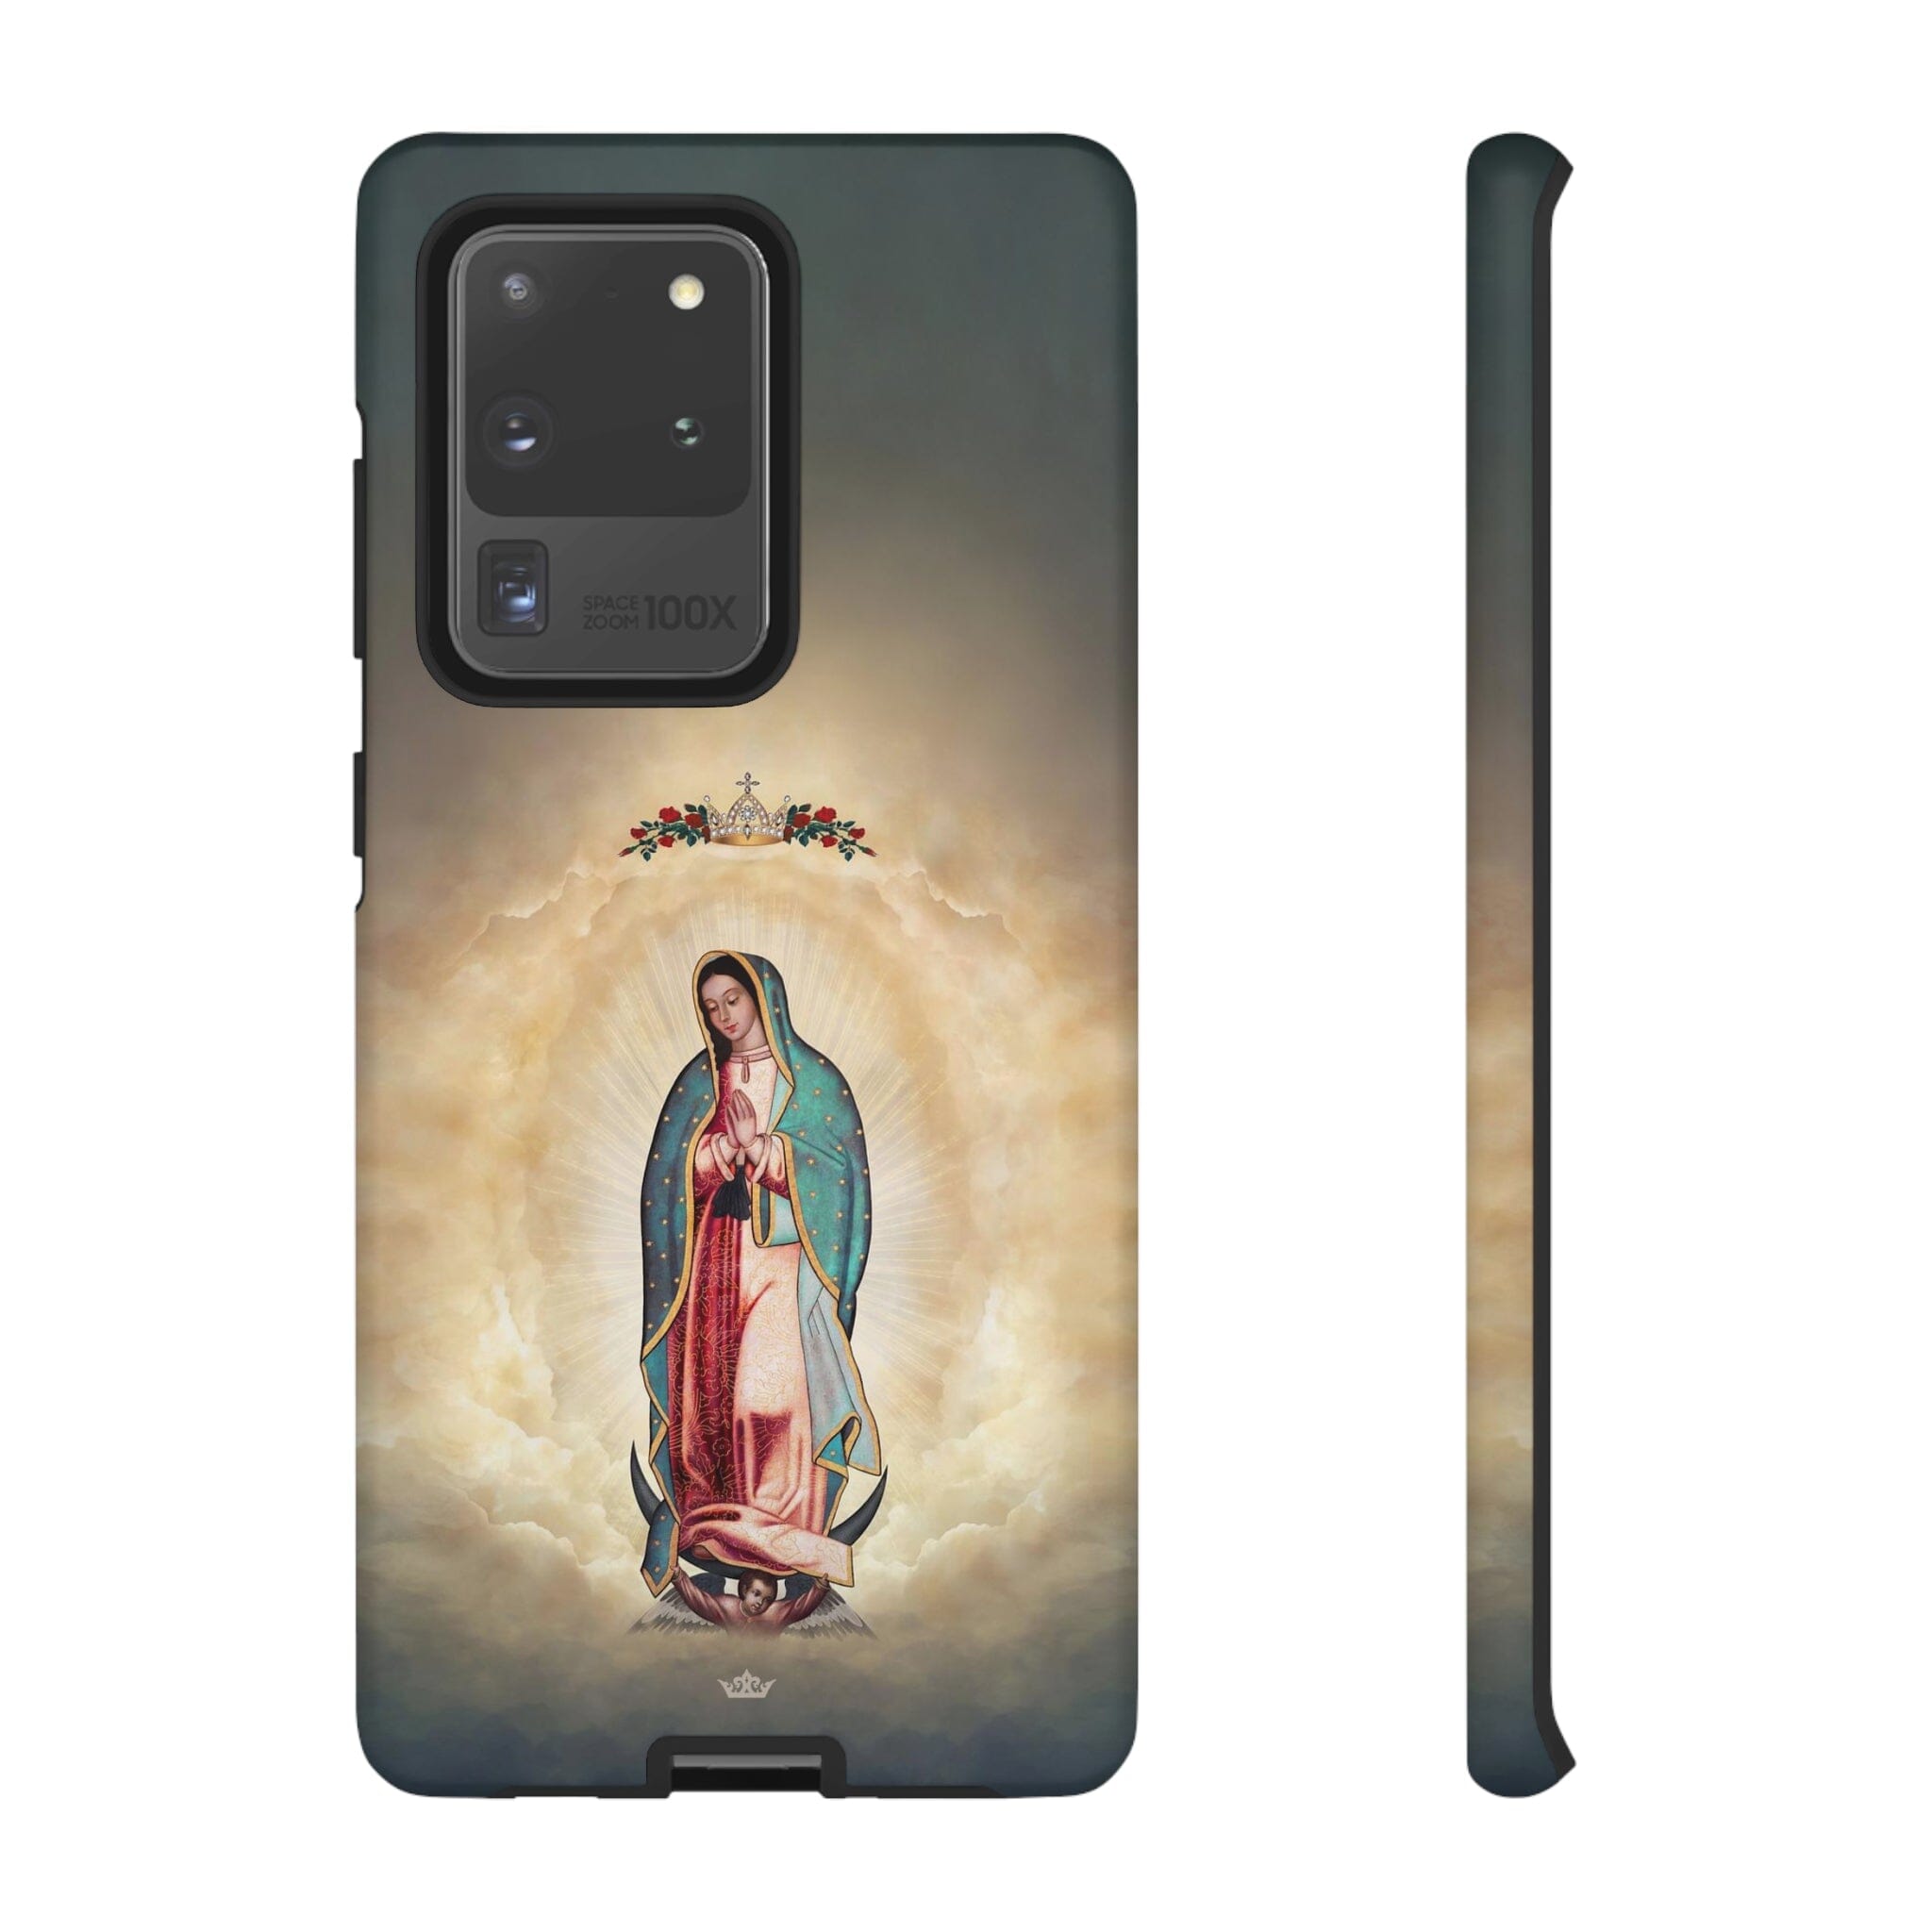 Our Lady of Guadalupe Hard Phone Case